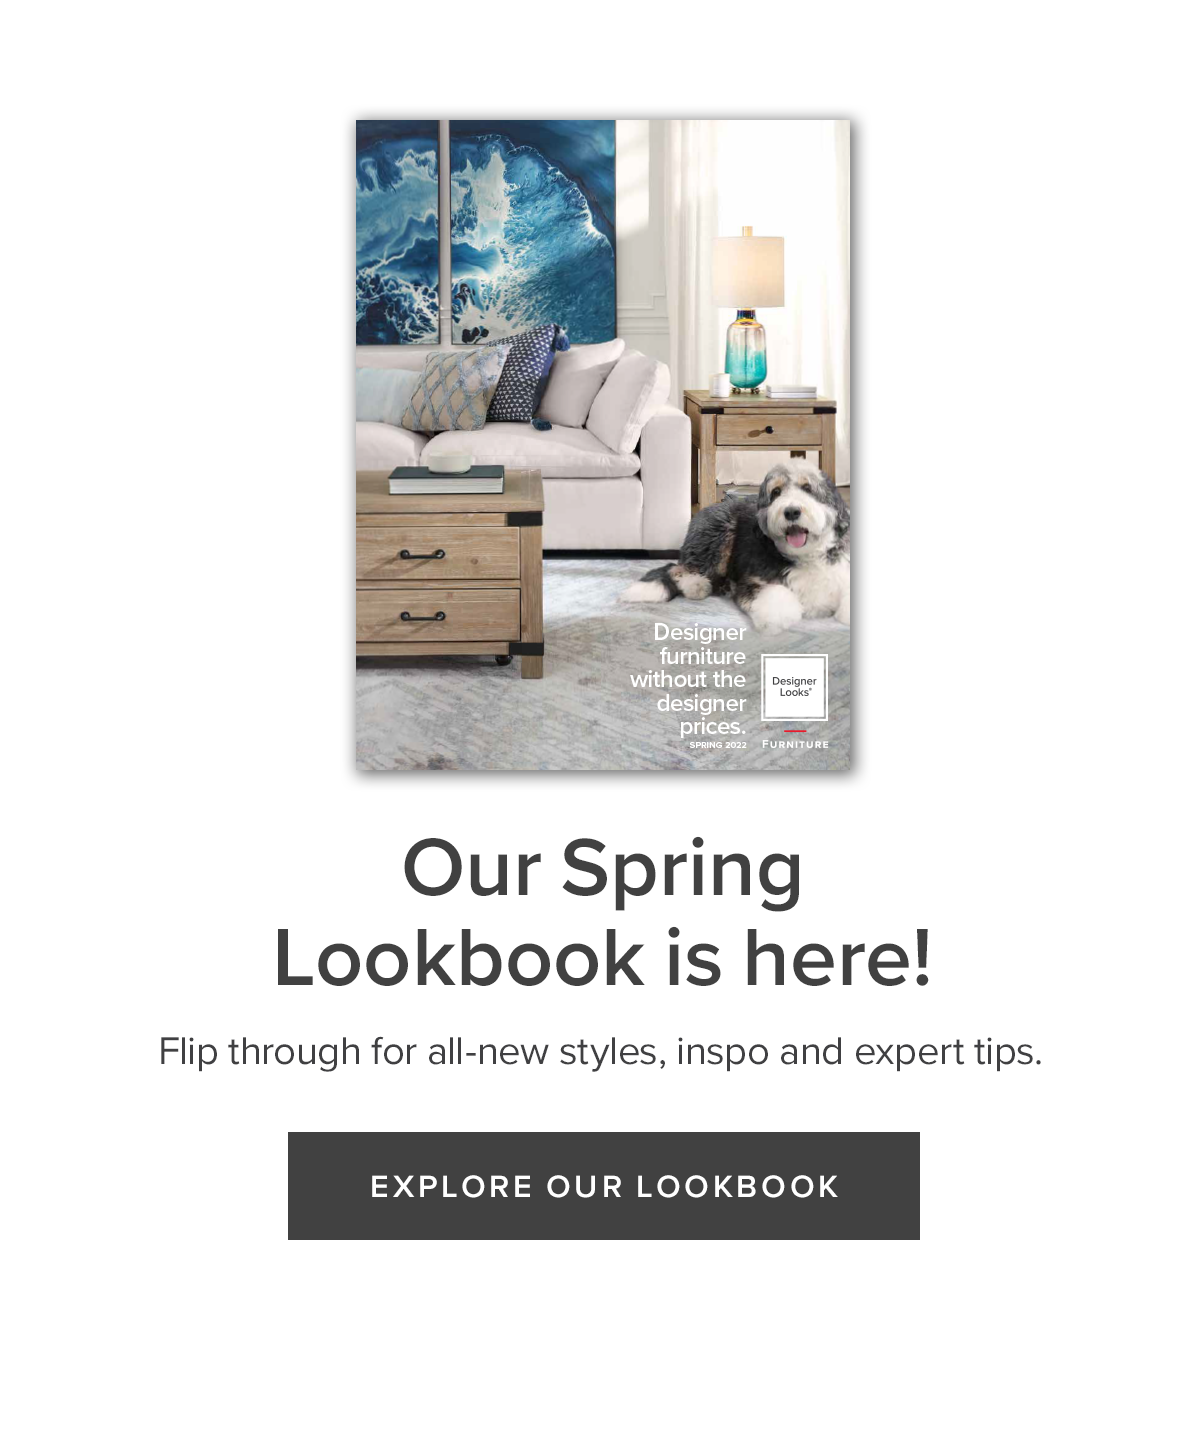 Our Spring Lookbook is here! Flip through for all-new styles, inspo and expert tips.